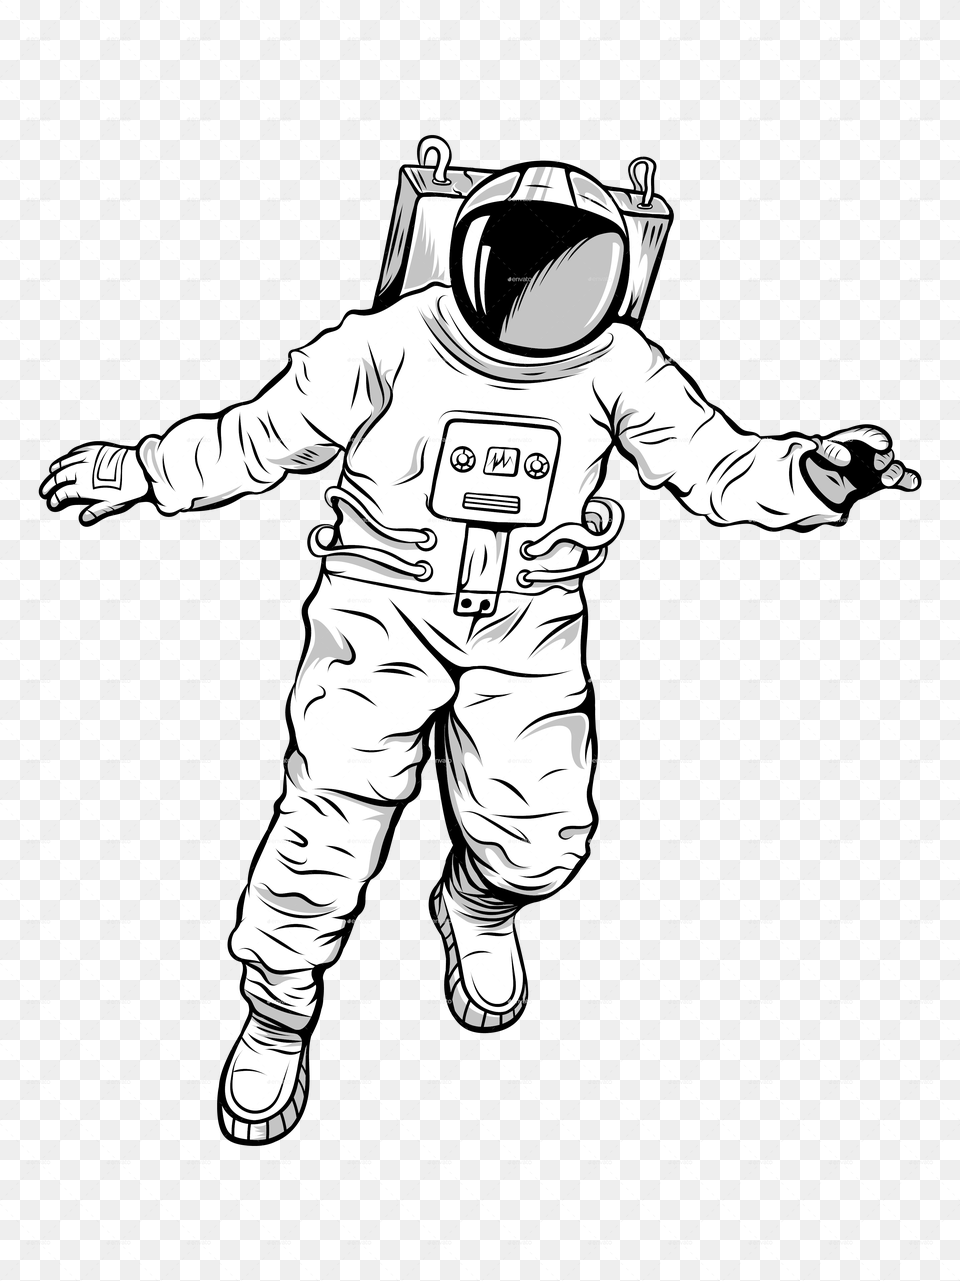 Floating Astronaut Illustration Astronaut Illustration, Baby, Person, People, Helmet Free Png